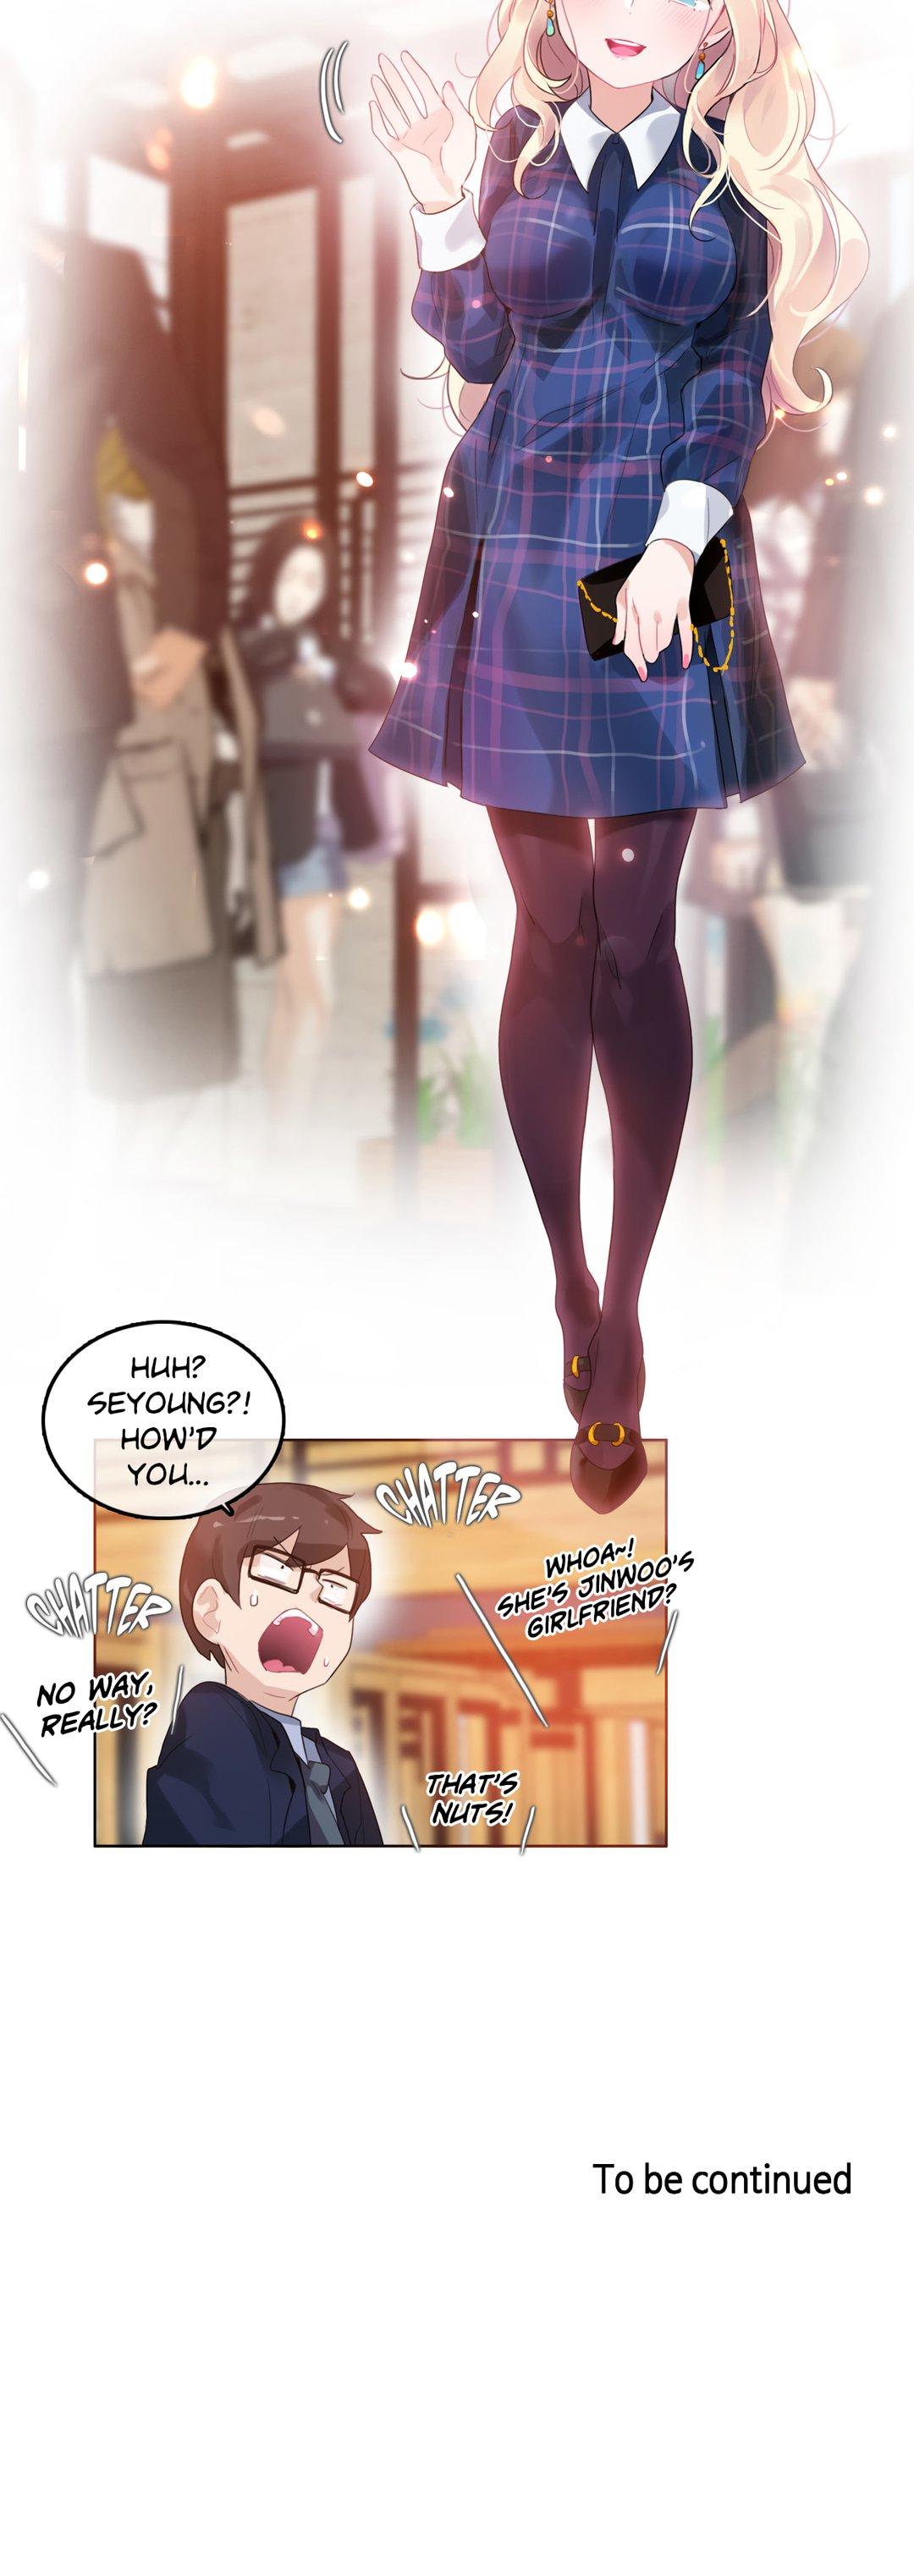 A Pervert's Daily Life • Chapter 41-45 42